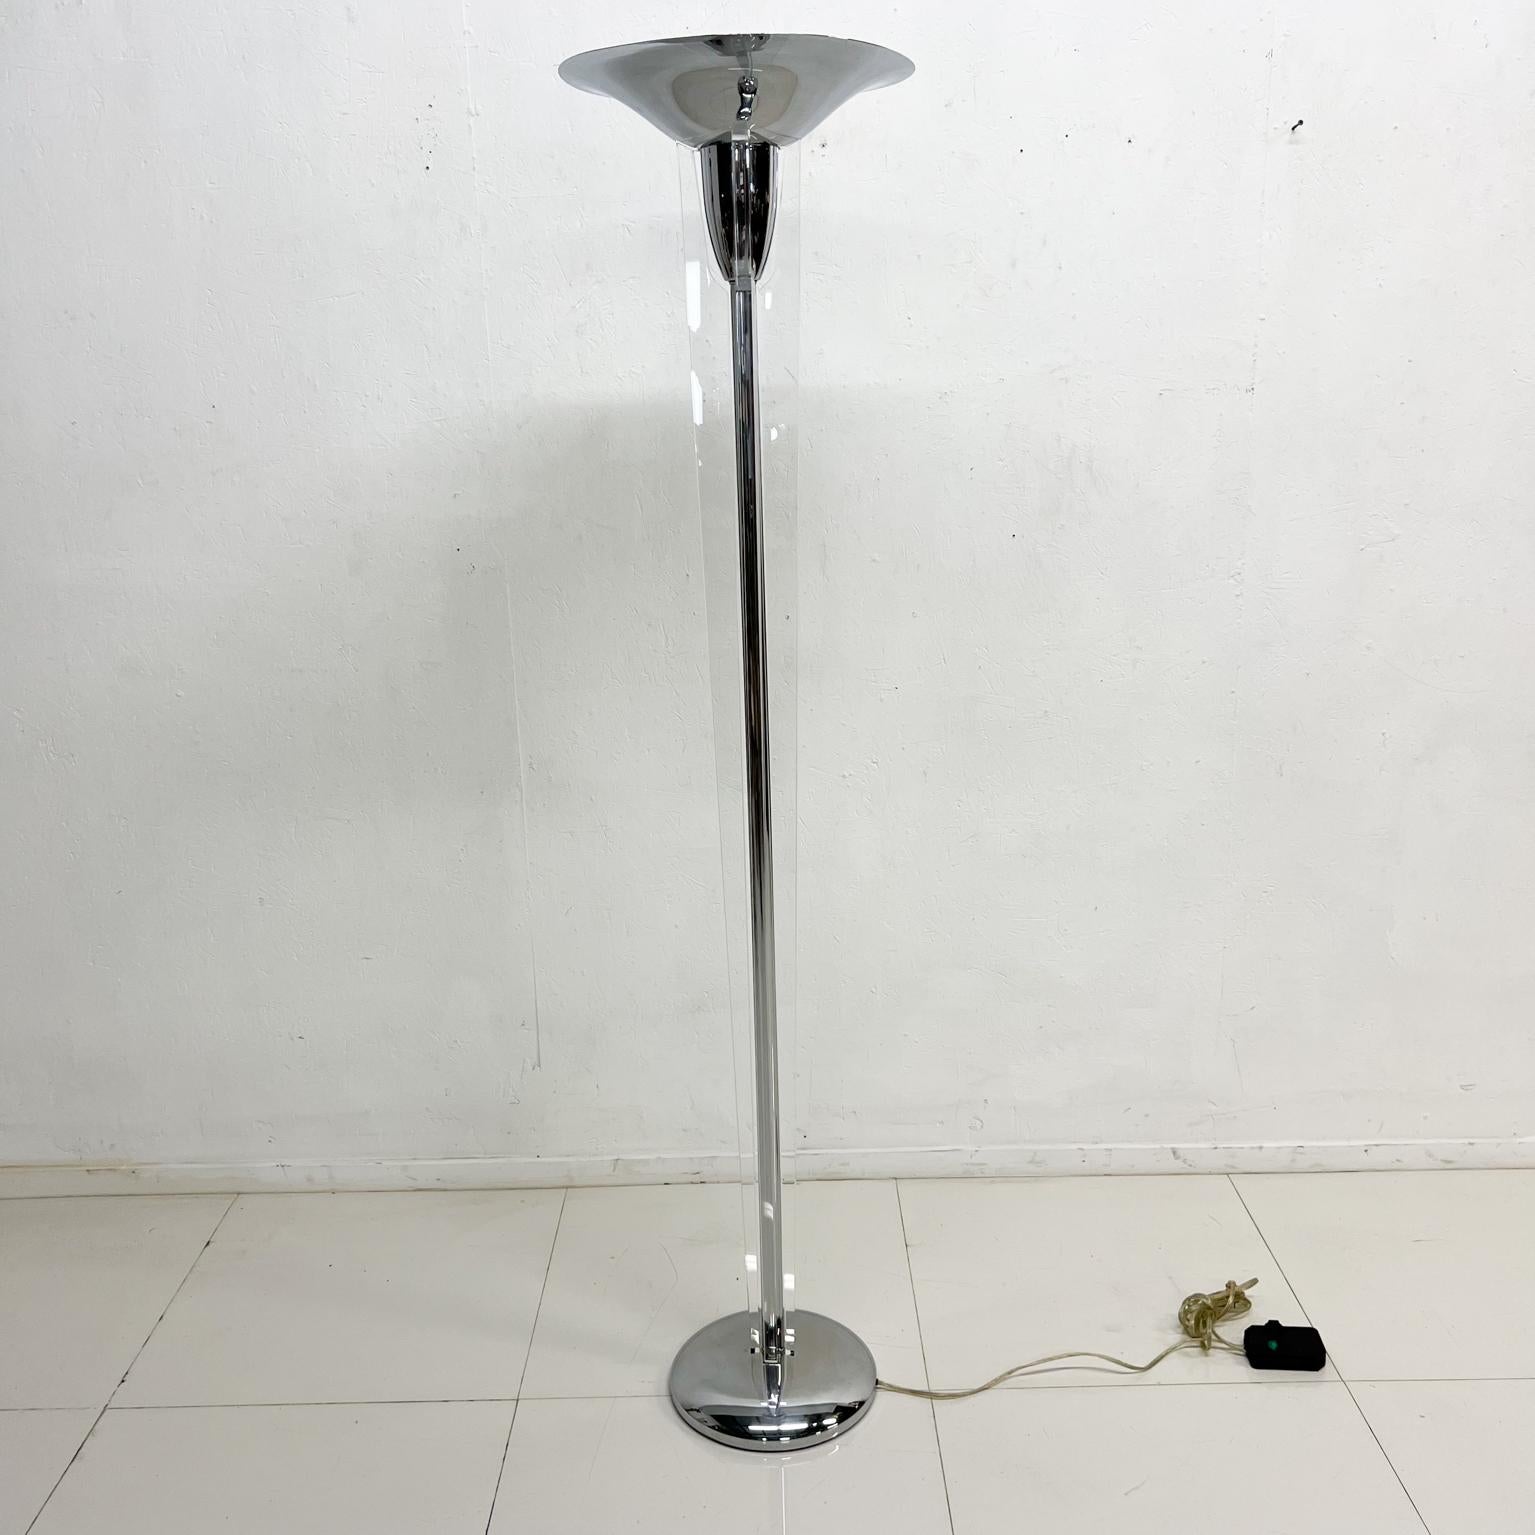 Art Deco Moderne Chrome Torchiere Floor Lamp by Boyd Lighting Company
Maker stamped
70 tall x 16.25 diameter
Preowned original vintage condition.
See images provided.
Delivery to LA OC Palm Springs




